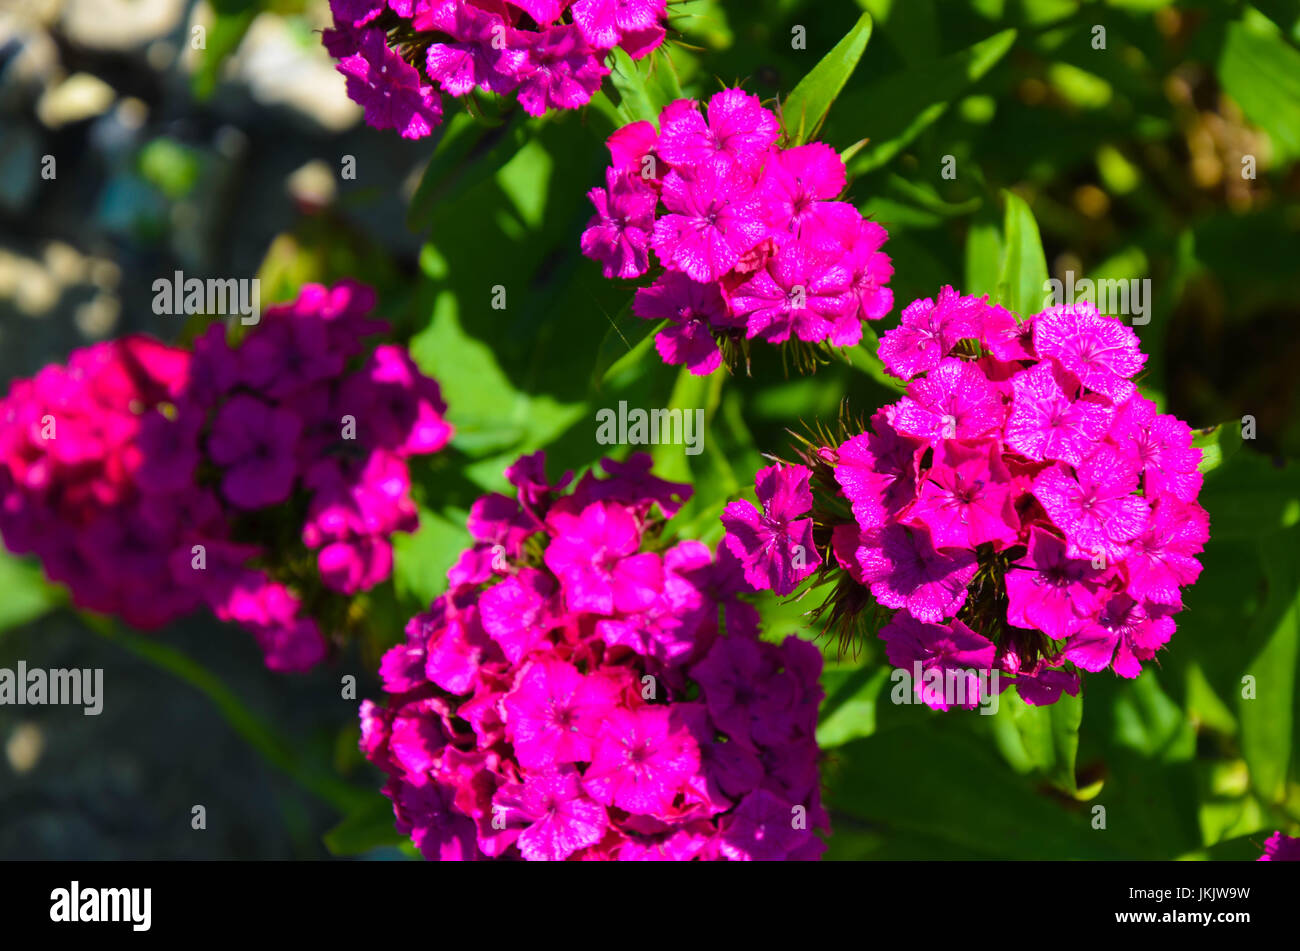 Flowerbed with Rose campion Lychnis coronaria as backgroung Stock Photo